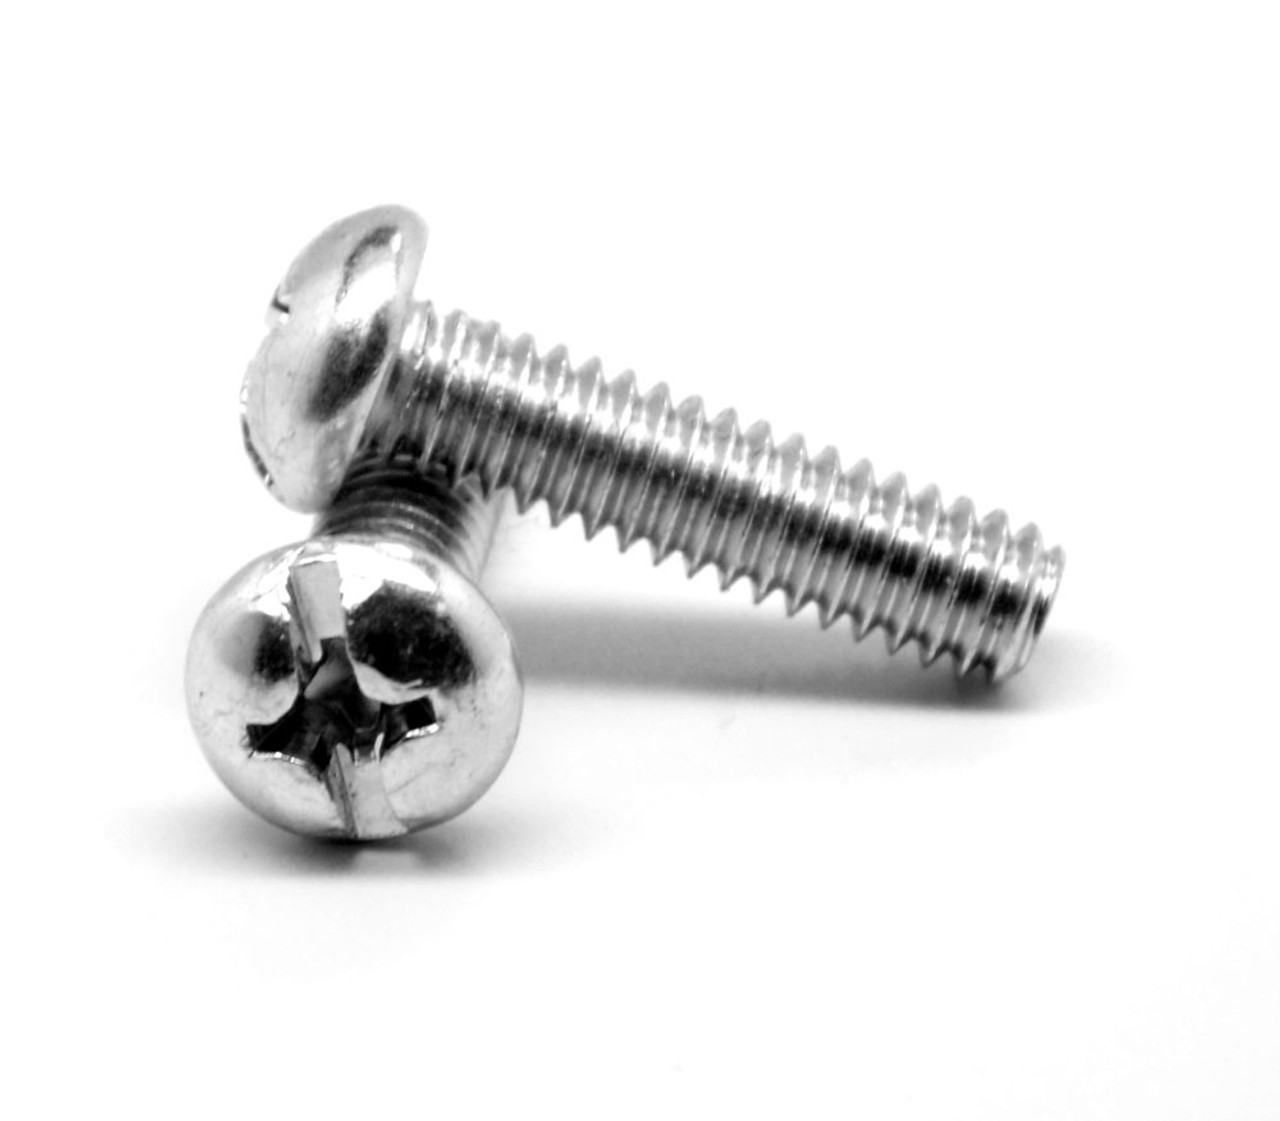 #10-32 x 1 3/4" (FT) Fine Thread Machine Screw Combo (Phillips/Slotted) Pan Head Low Carbon Steel Zinc Plated